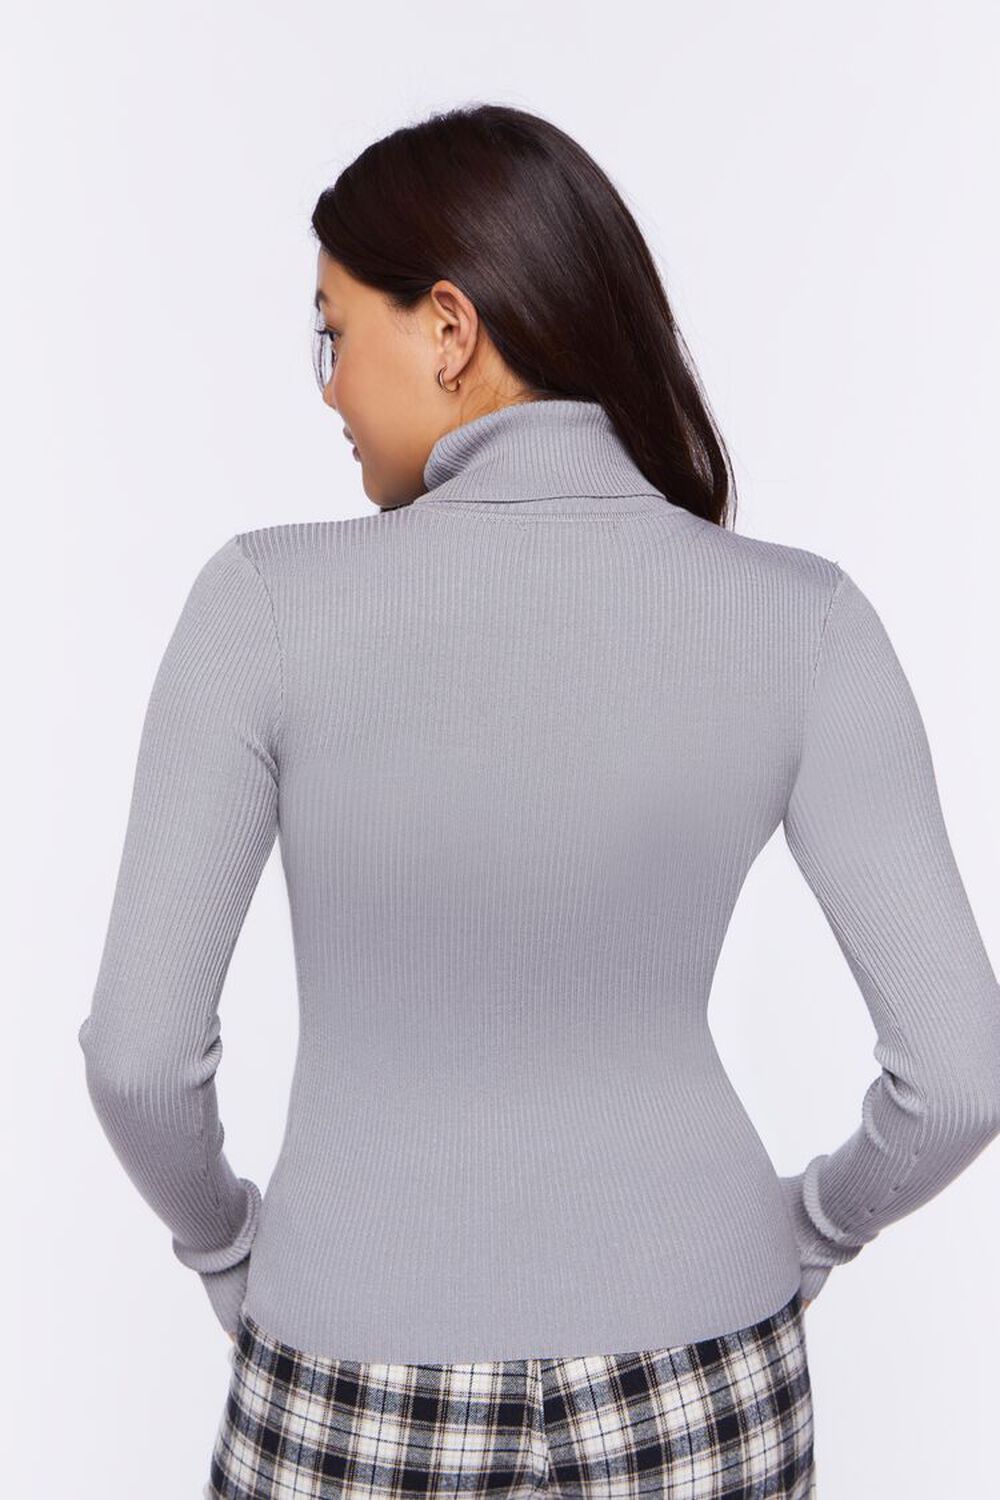 GREY Ribbed Turtleneck Sweater-Knit Top, image 3